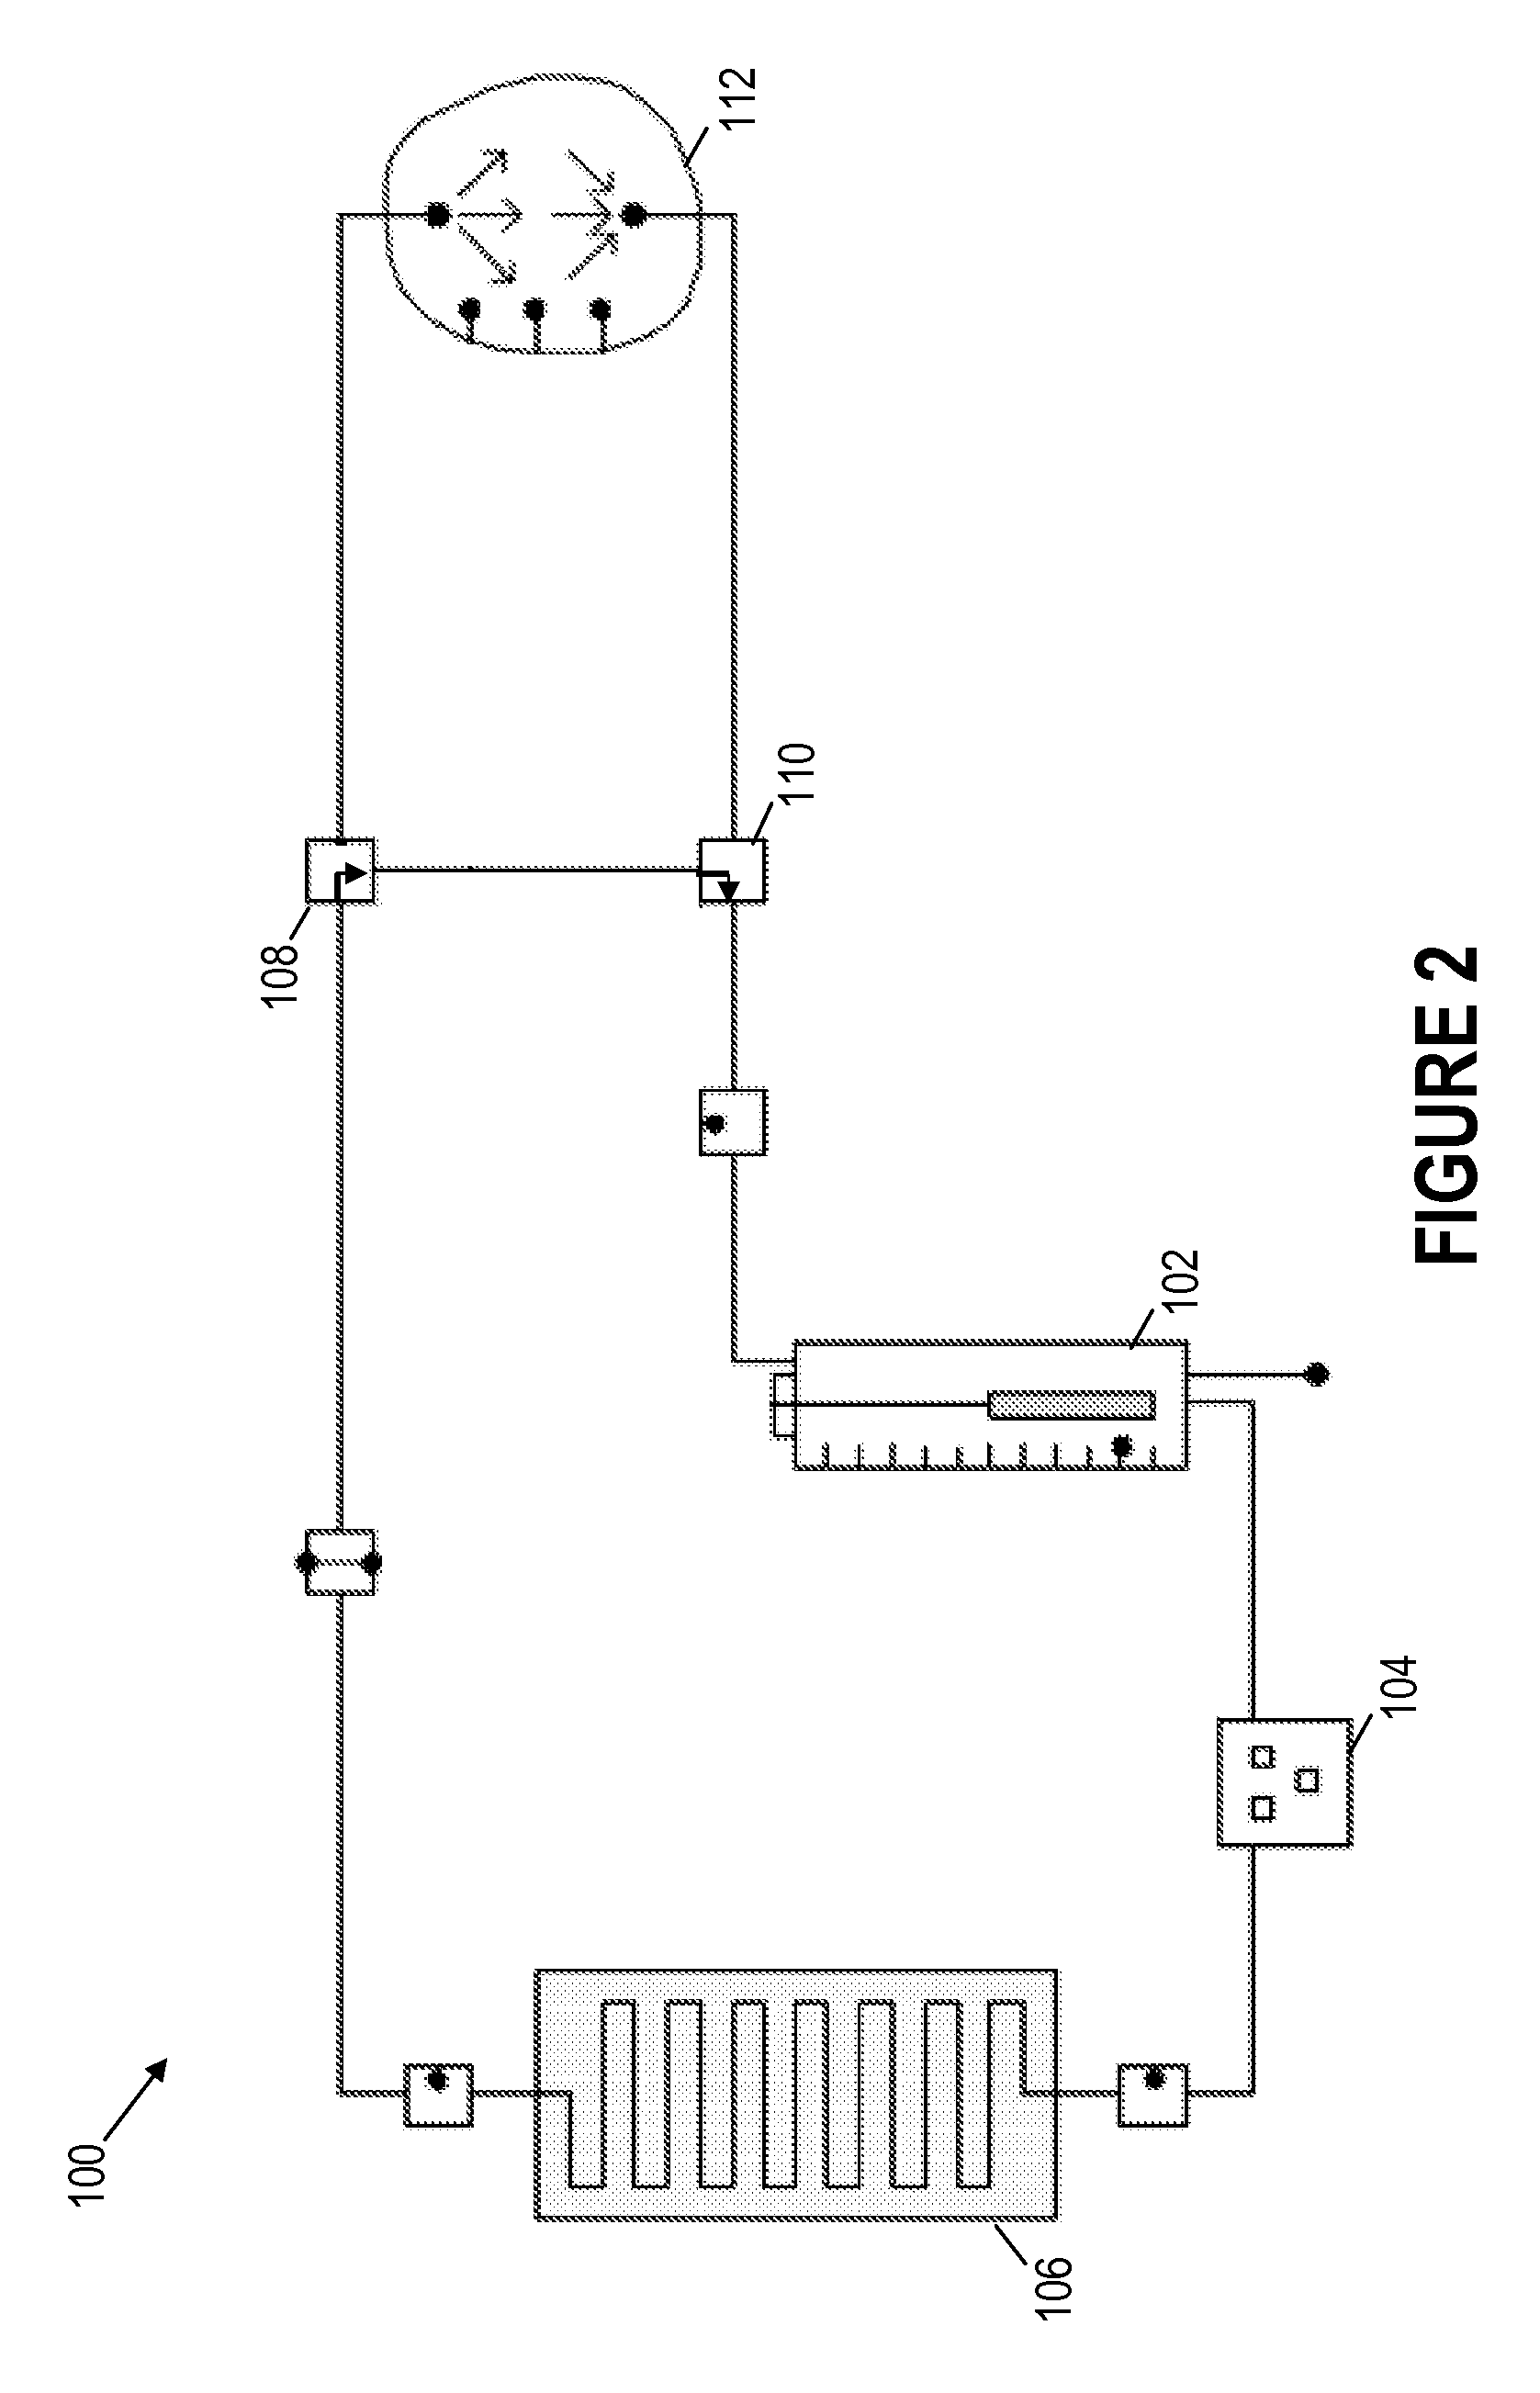 System and method for regulating the temperature of a fluid injected into a patient